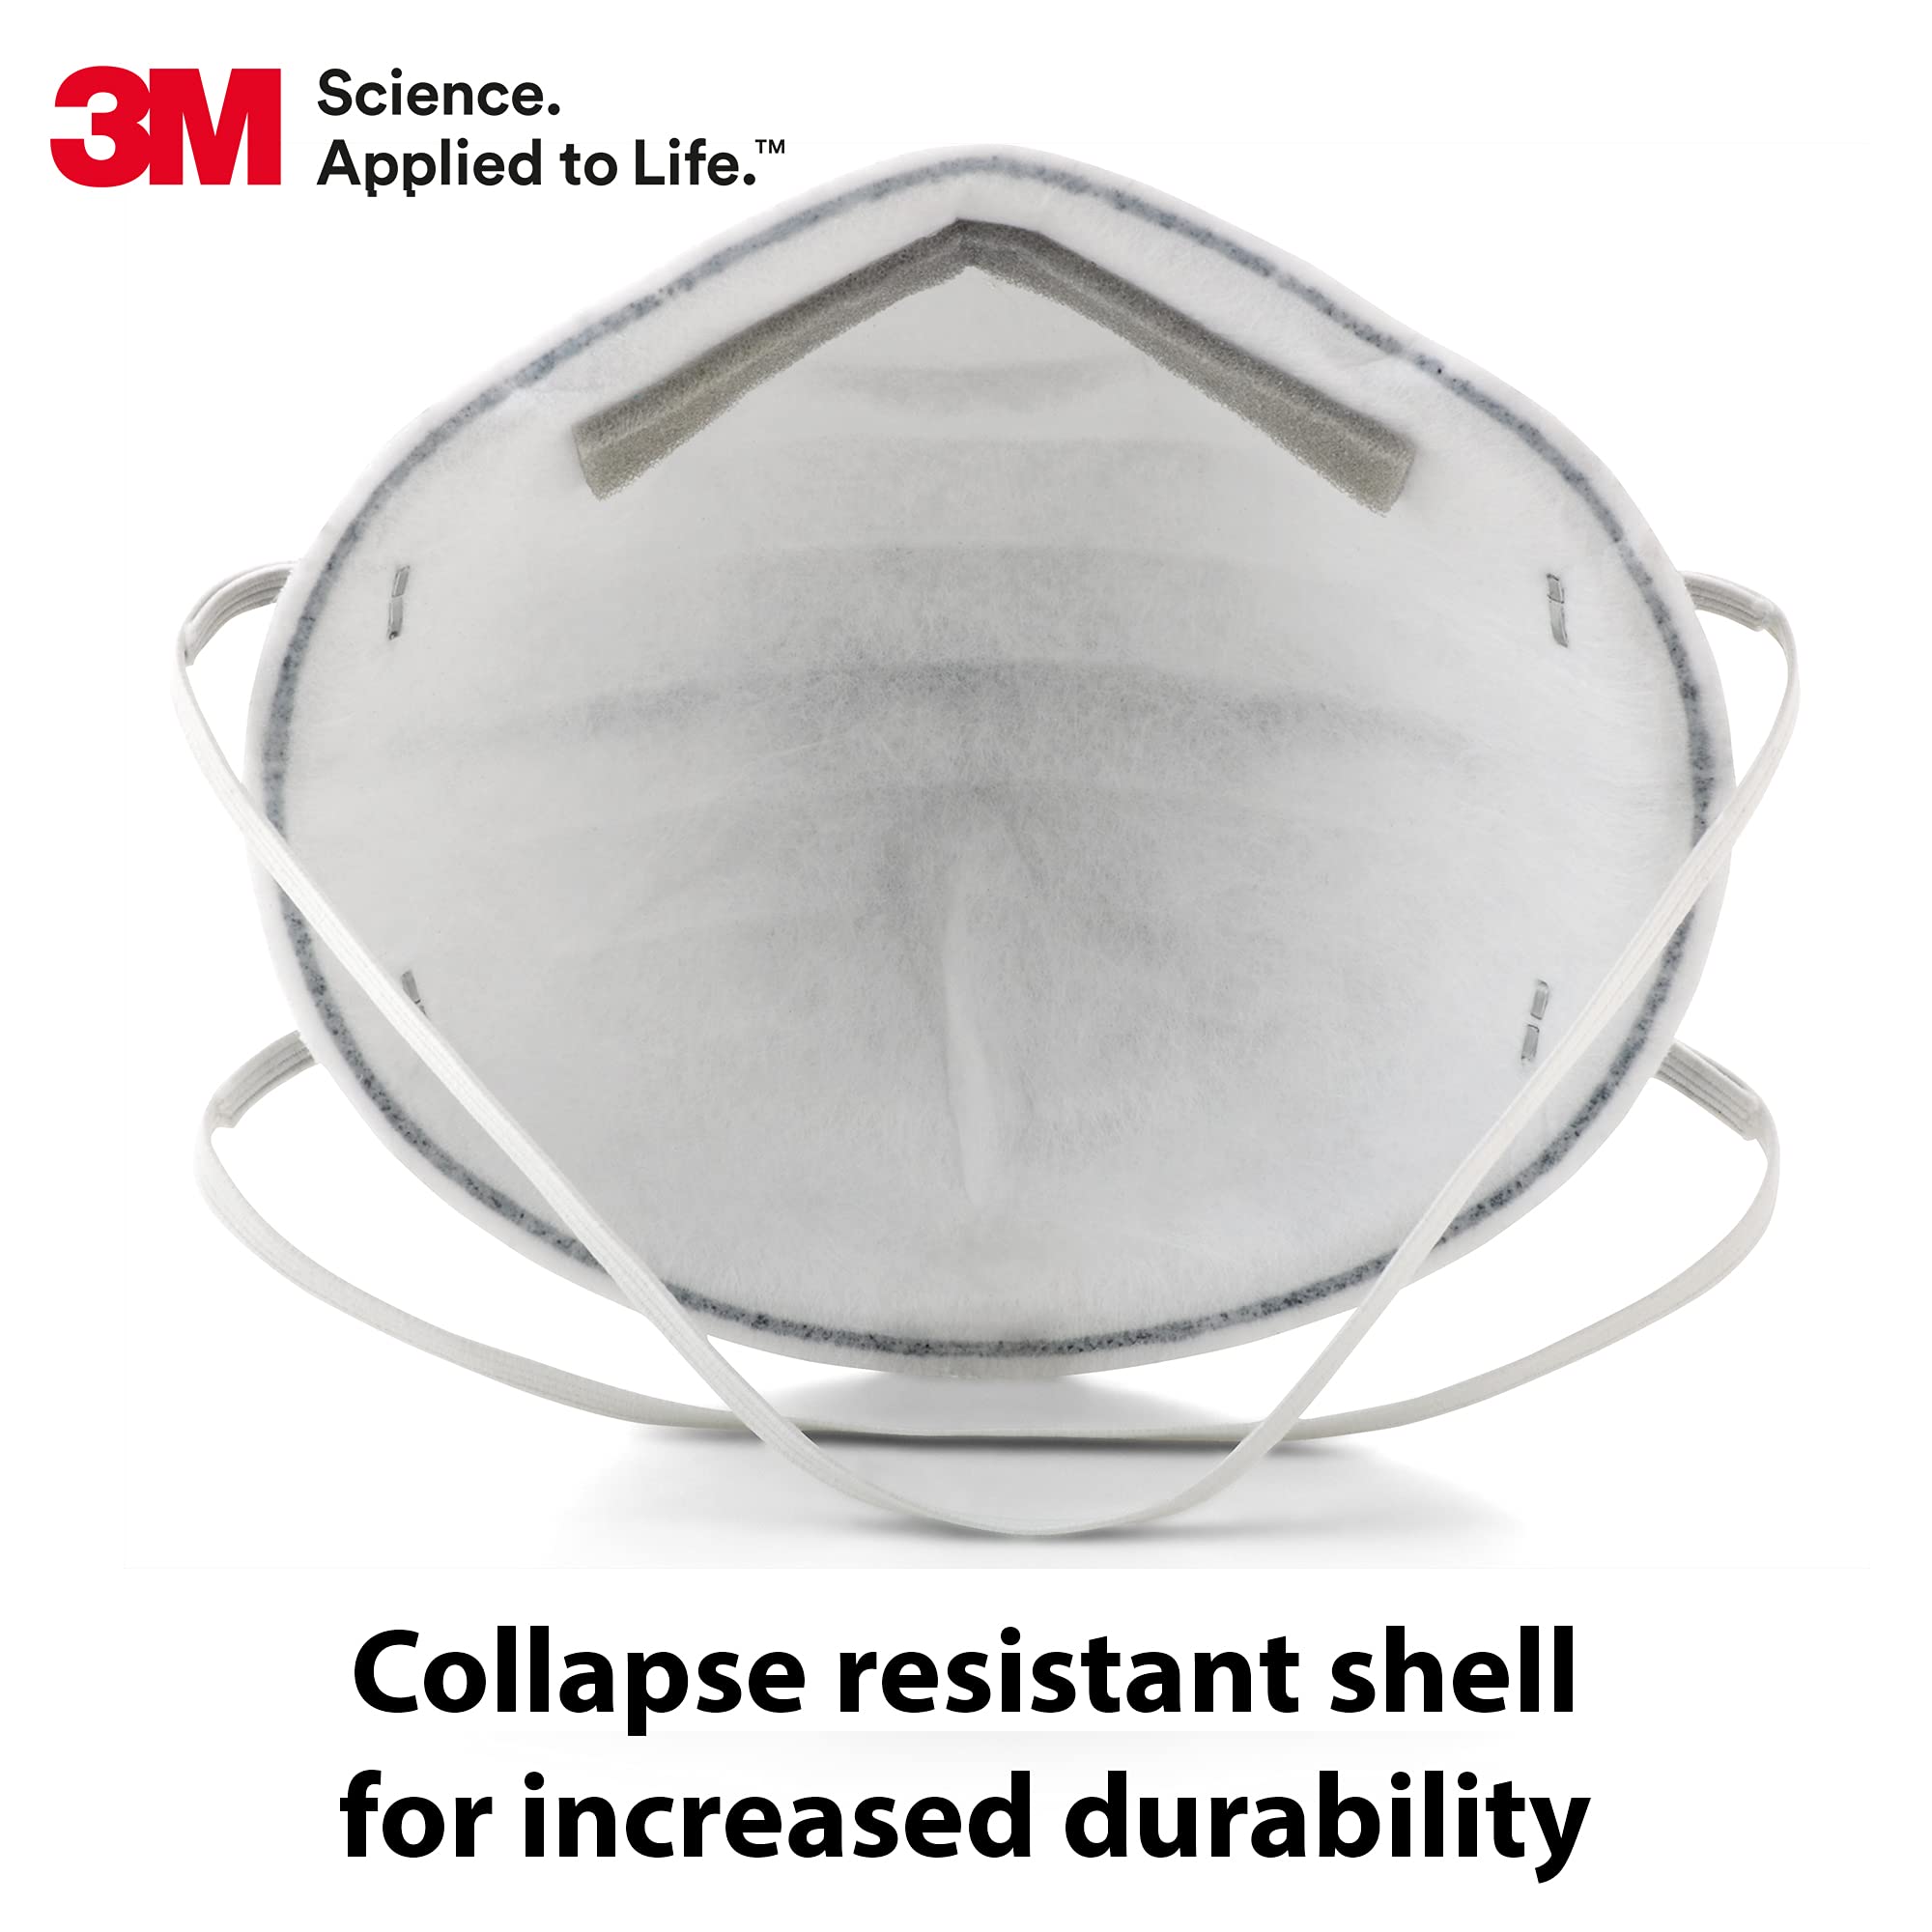 3M Particulate Respirator 8247, Pack of 20, R95, Nuisance Level Organic Vapor Relief, Braided Comfort Strap, Carbon Filter Material, Disposable General Purpose for Dust and other Particles